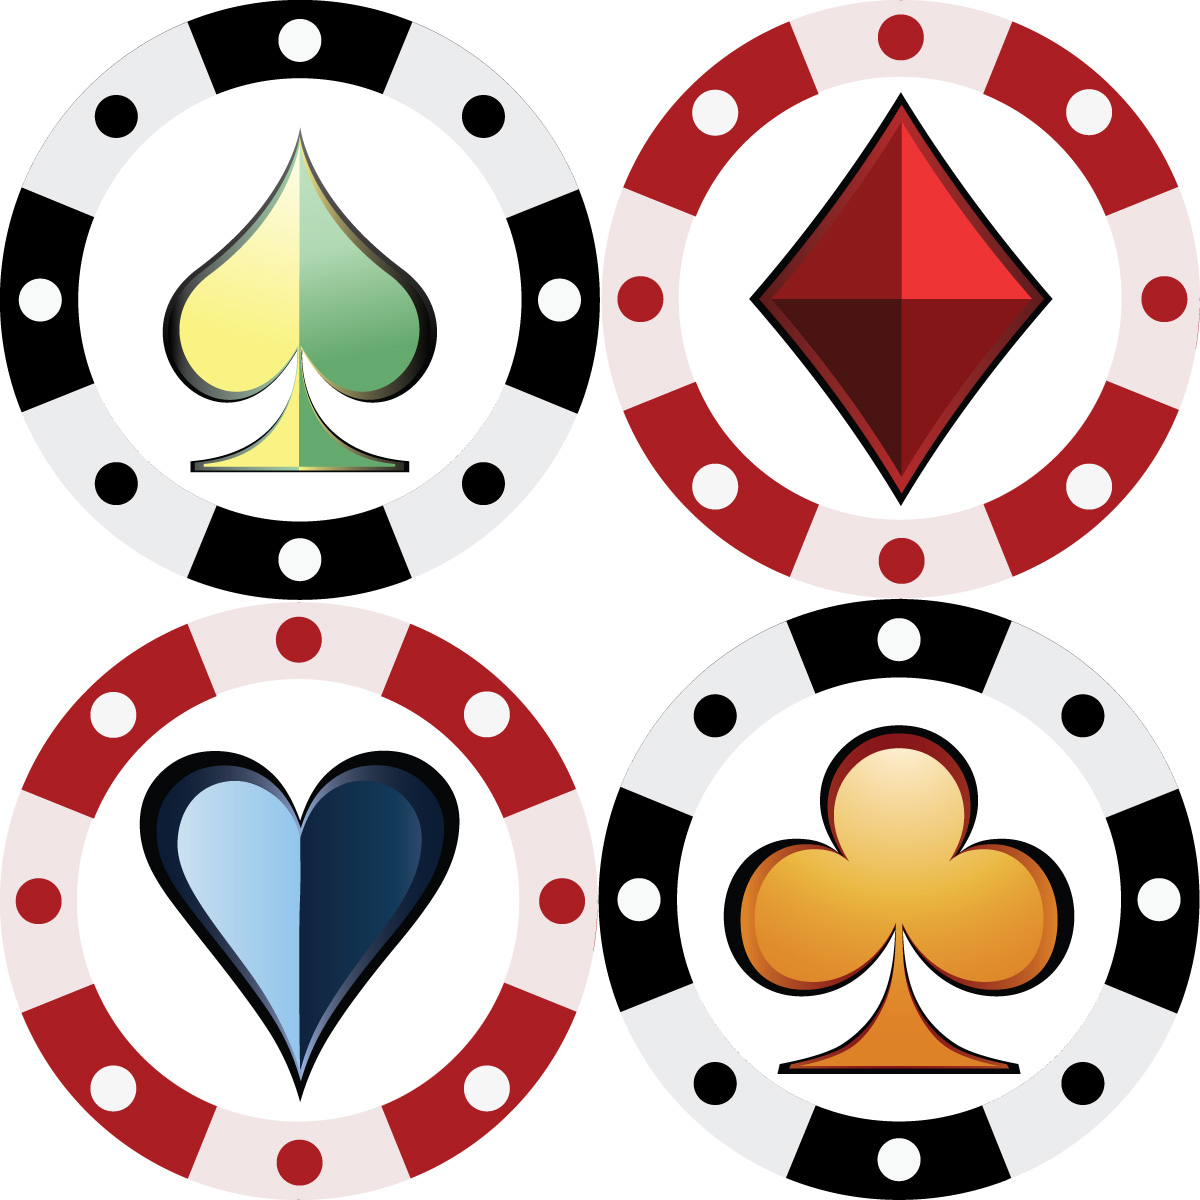 free clipart images playing cards - photo #46